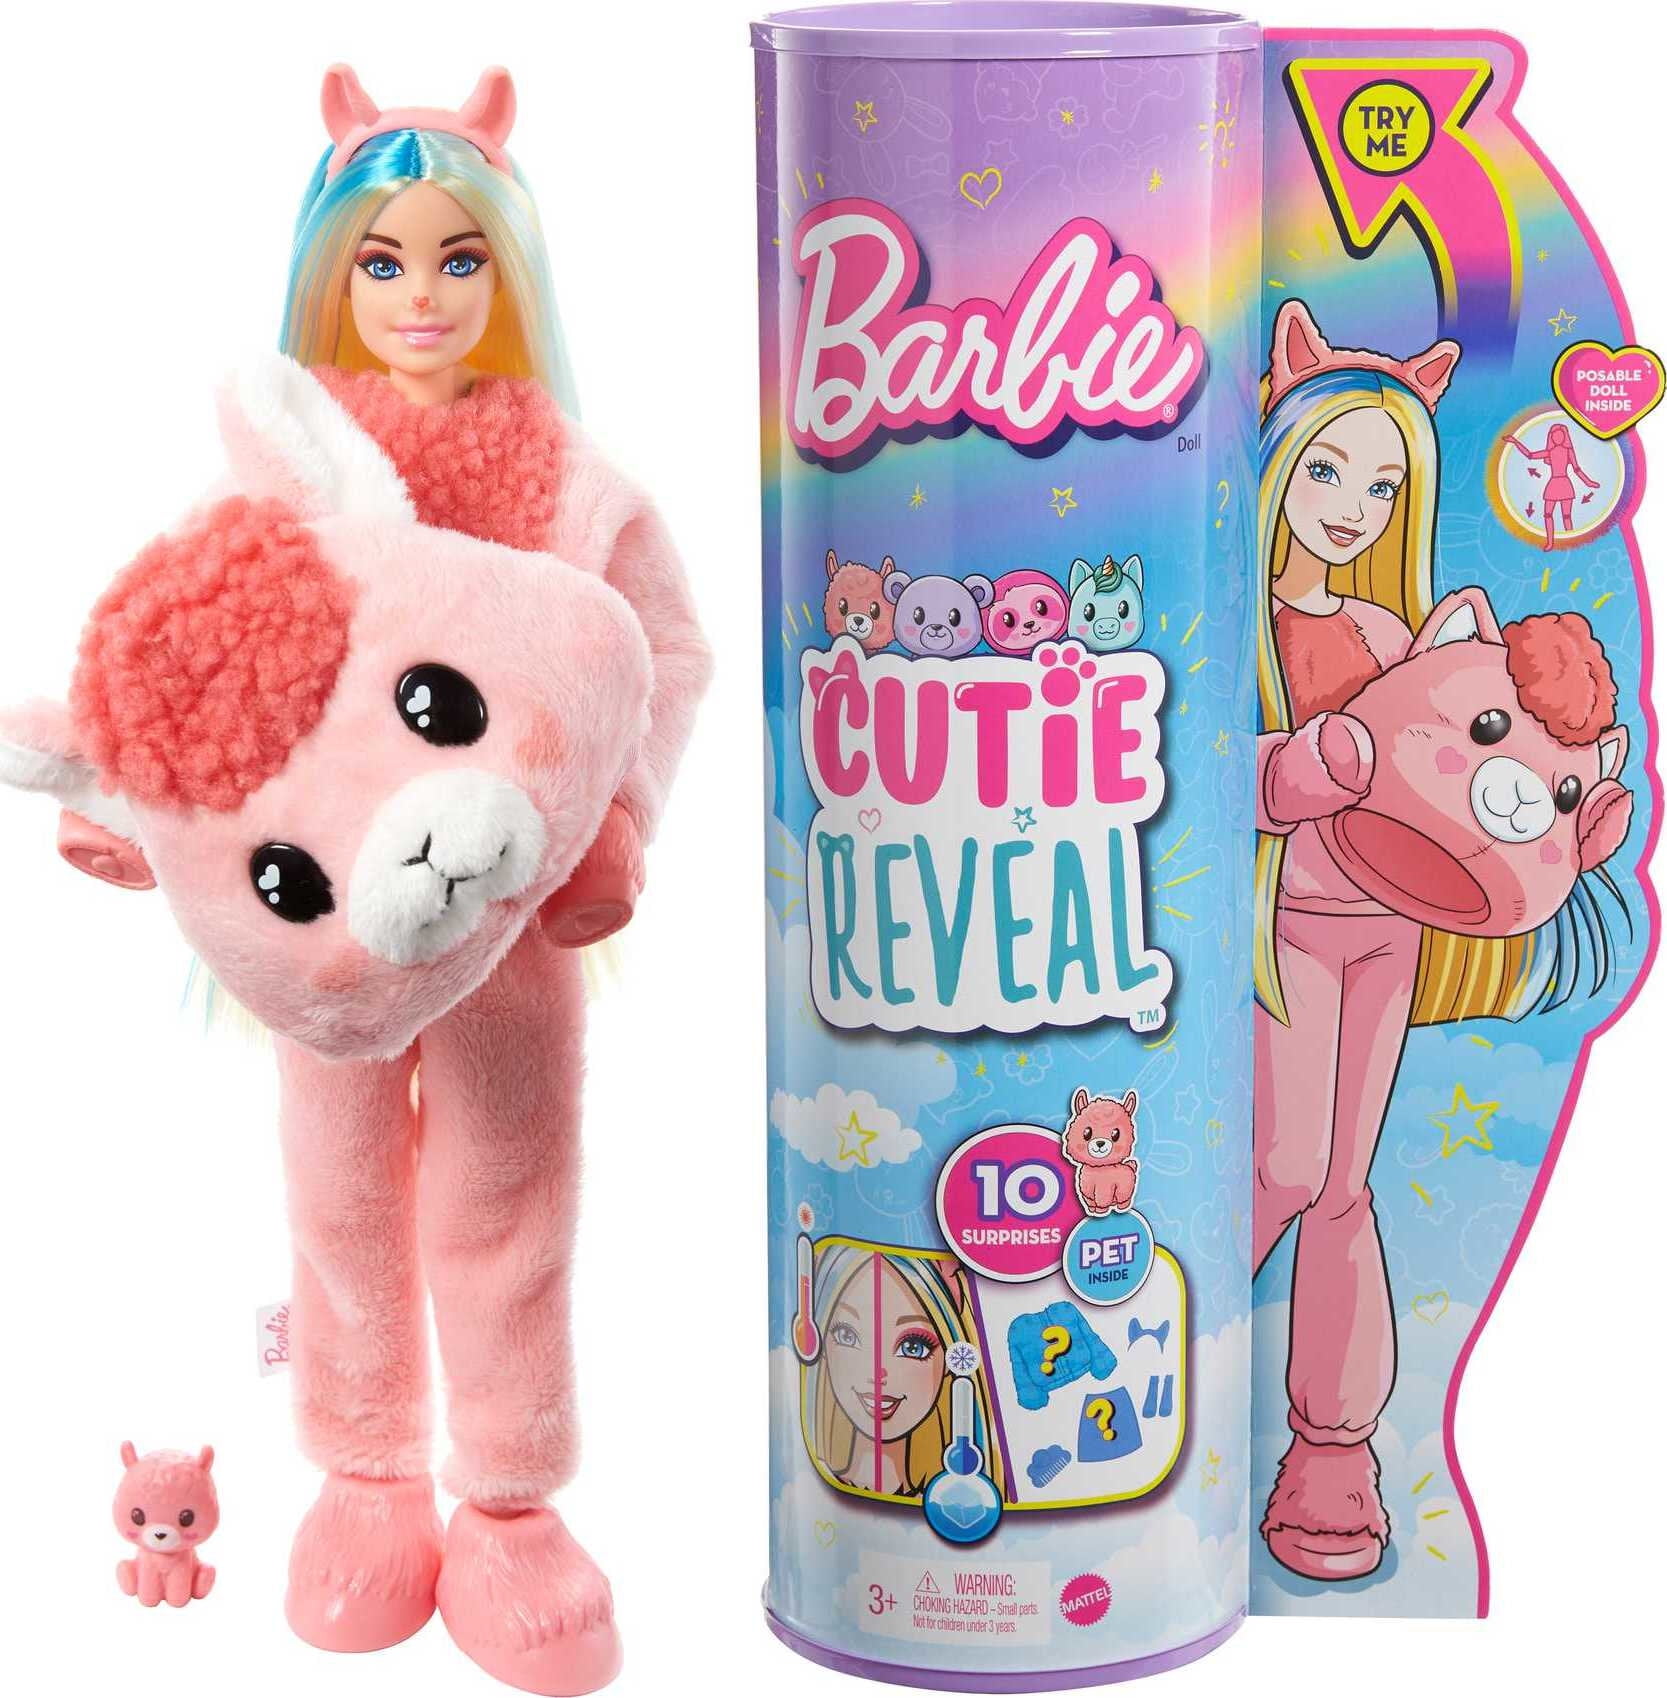 Barbie Doll Cutie Reveal Llama Plush Costume Doll with Pet, Color Change -  